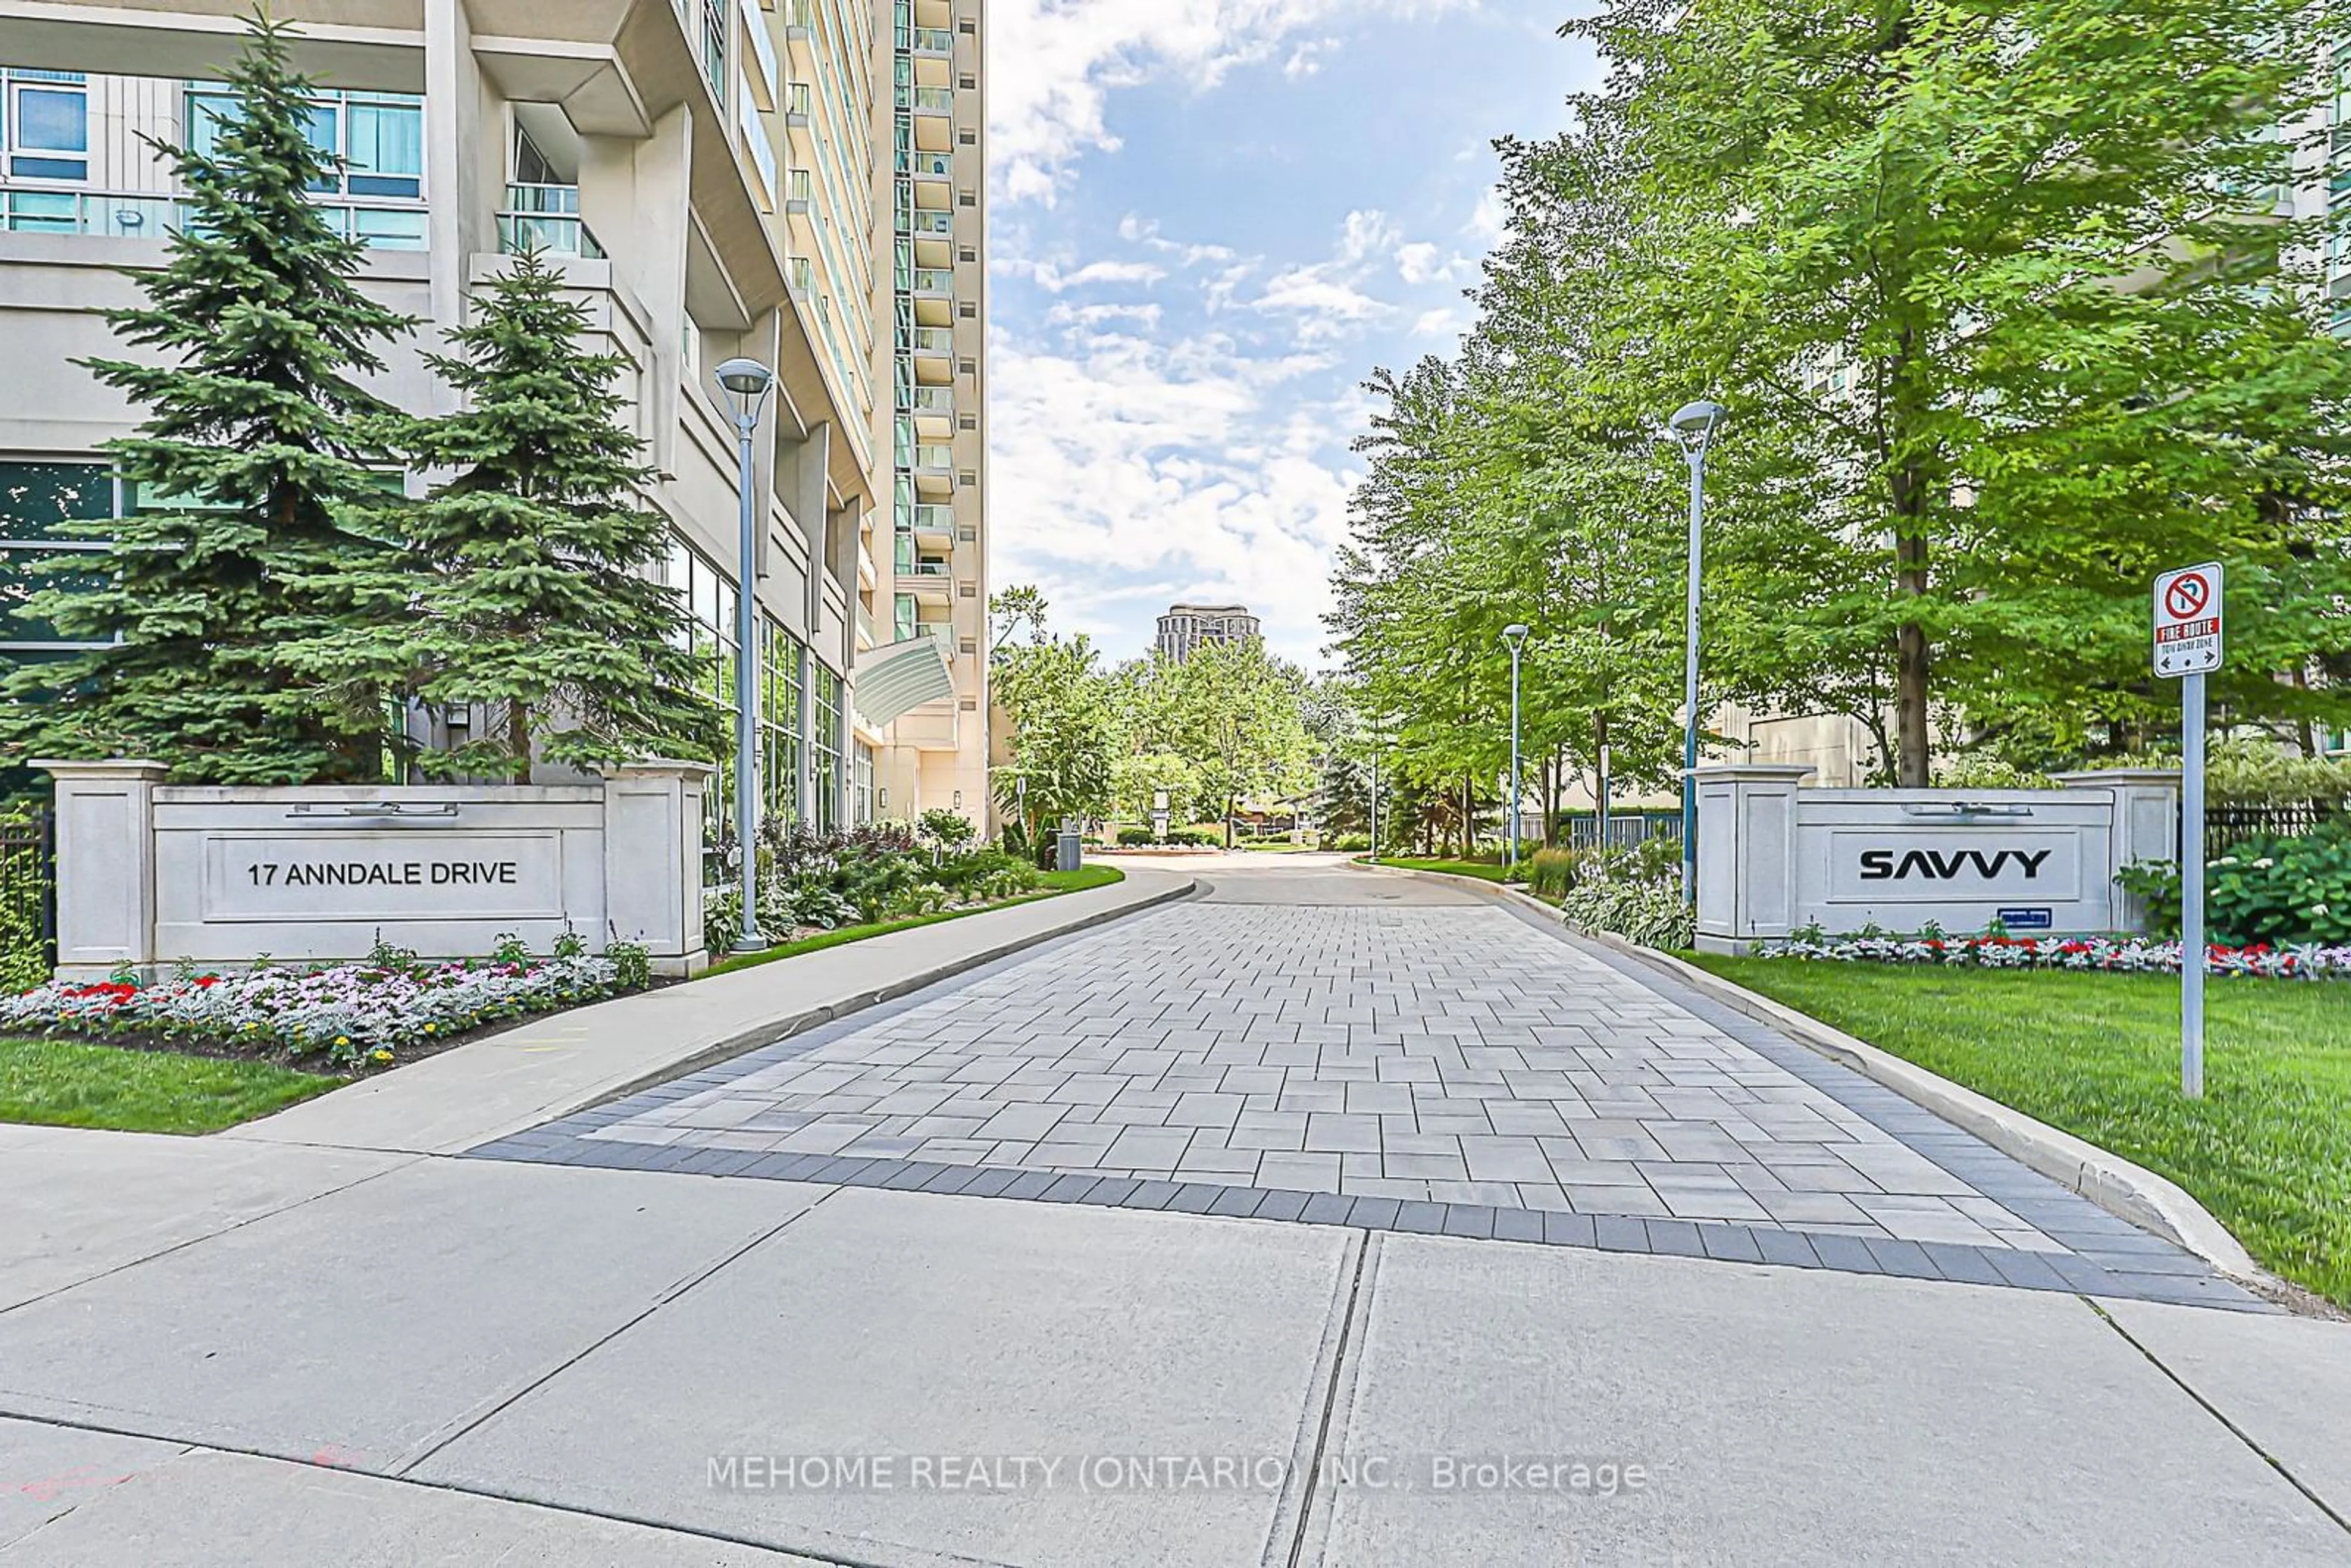 A pic from exterior of the house or condo for 17 Anndale Dr #1616, Toronto Ontario M2N 2W7